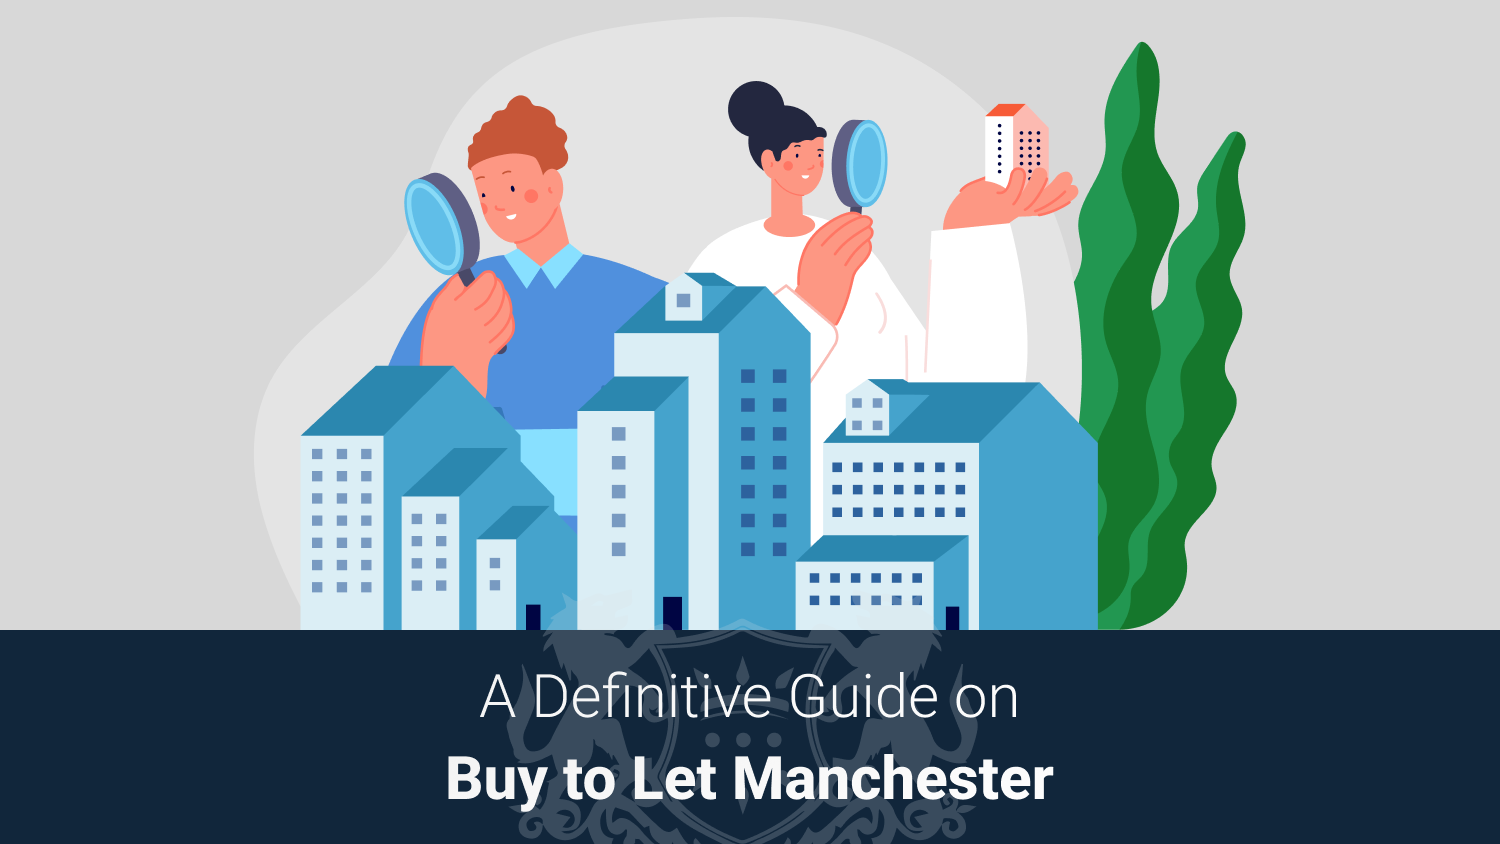 A Definitive Guide on Buy to Let Manchester